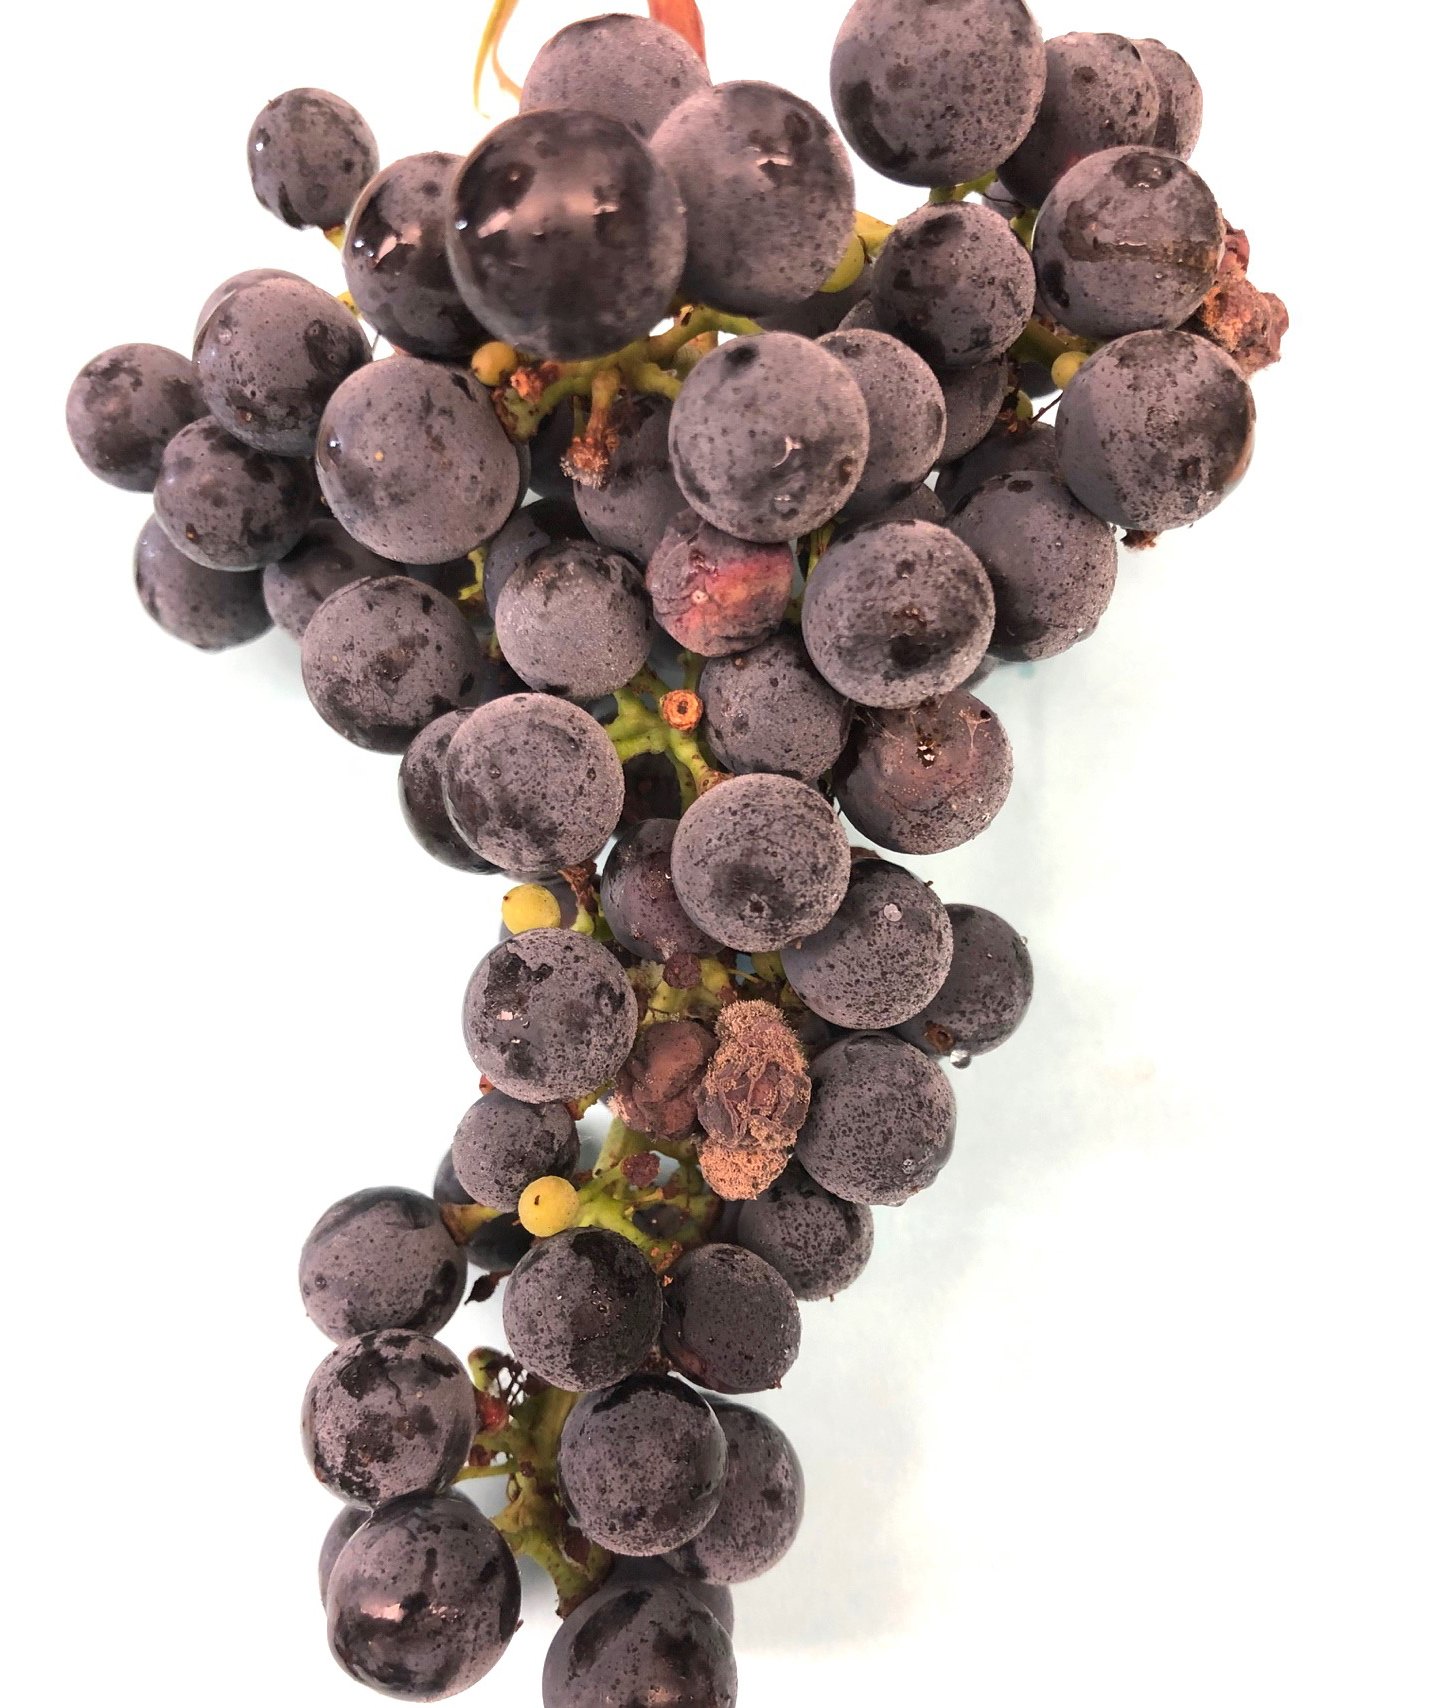 Botrytis bunch rot on Chancellor grapes 